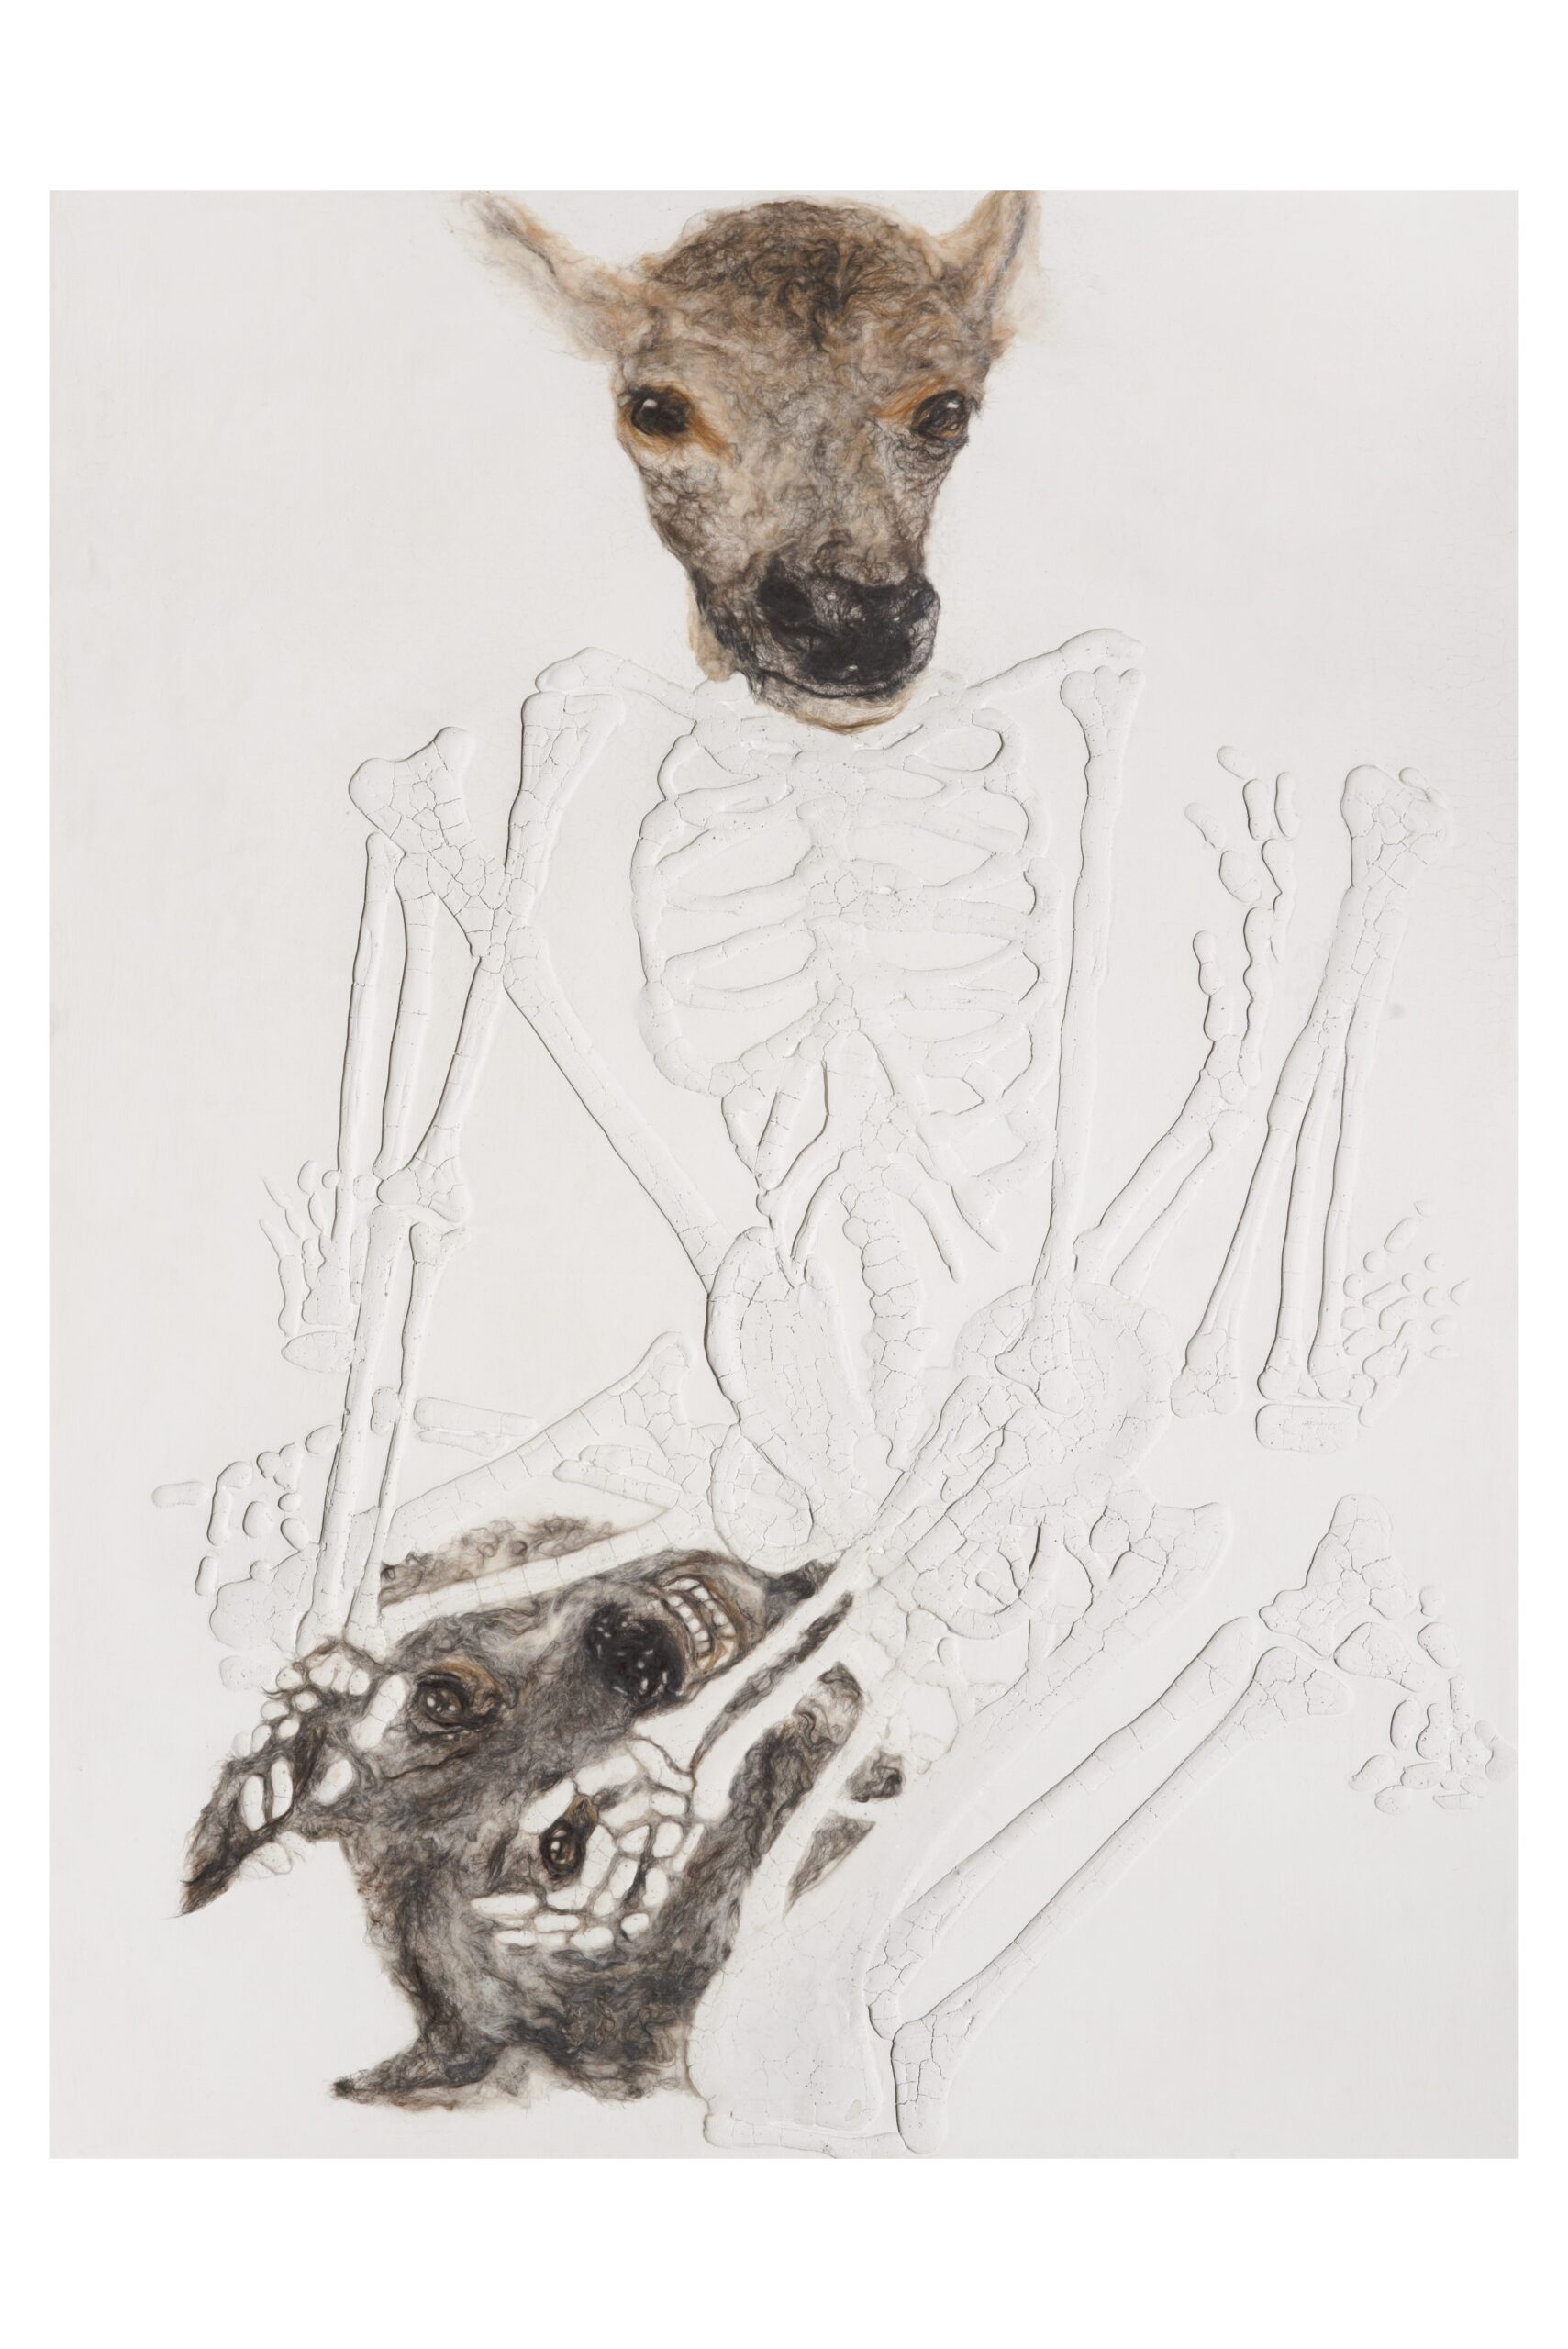 A drawing of a dog and skeleton